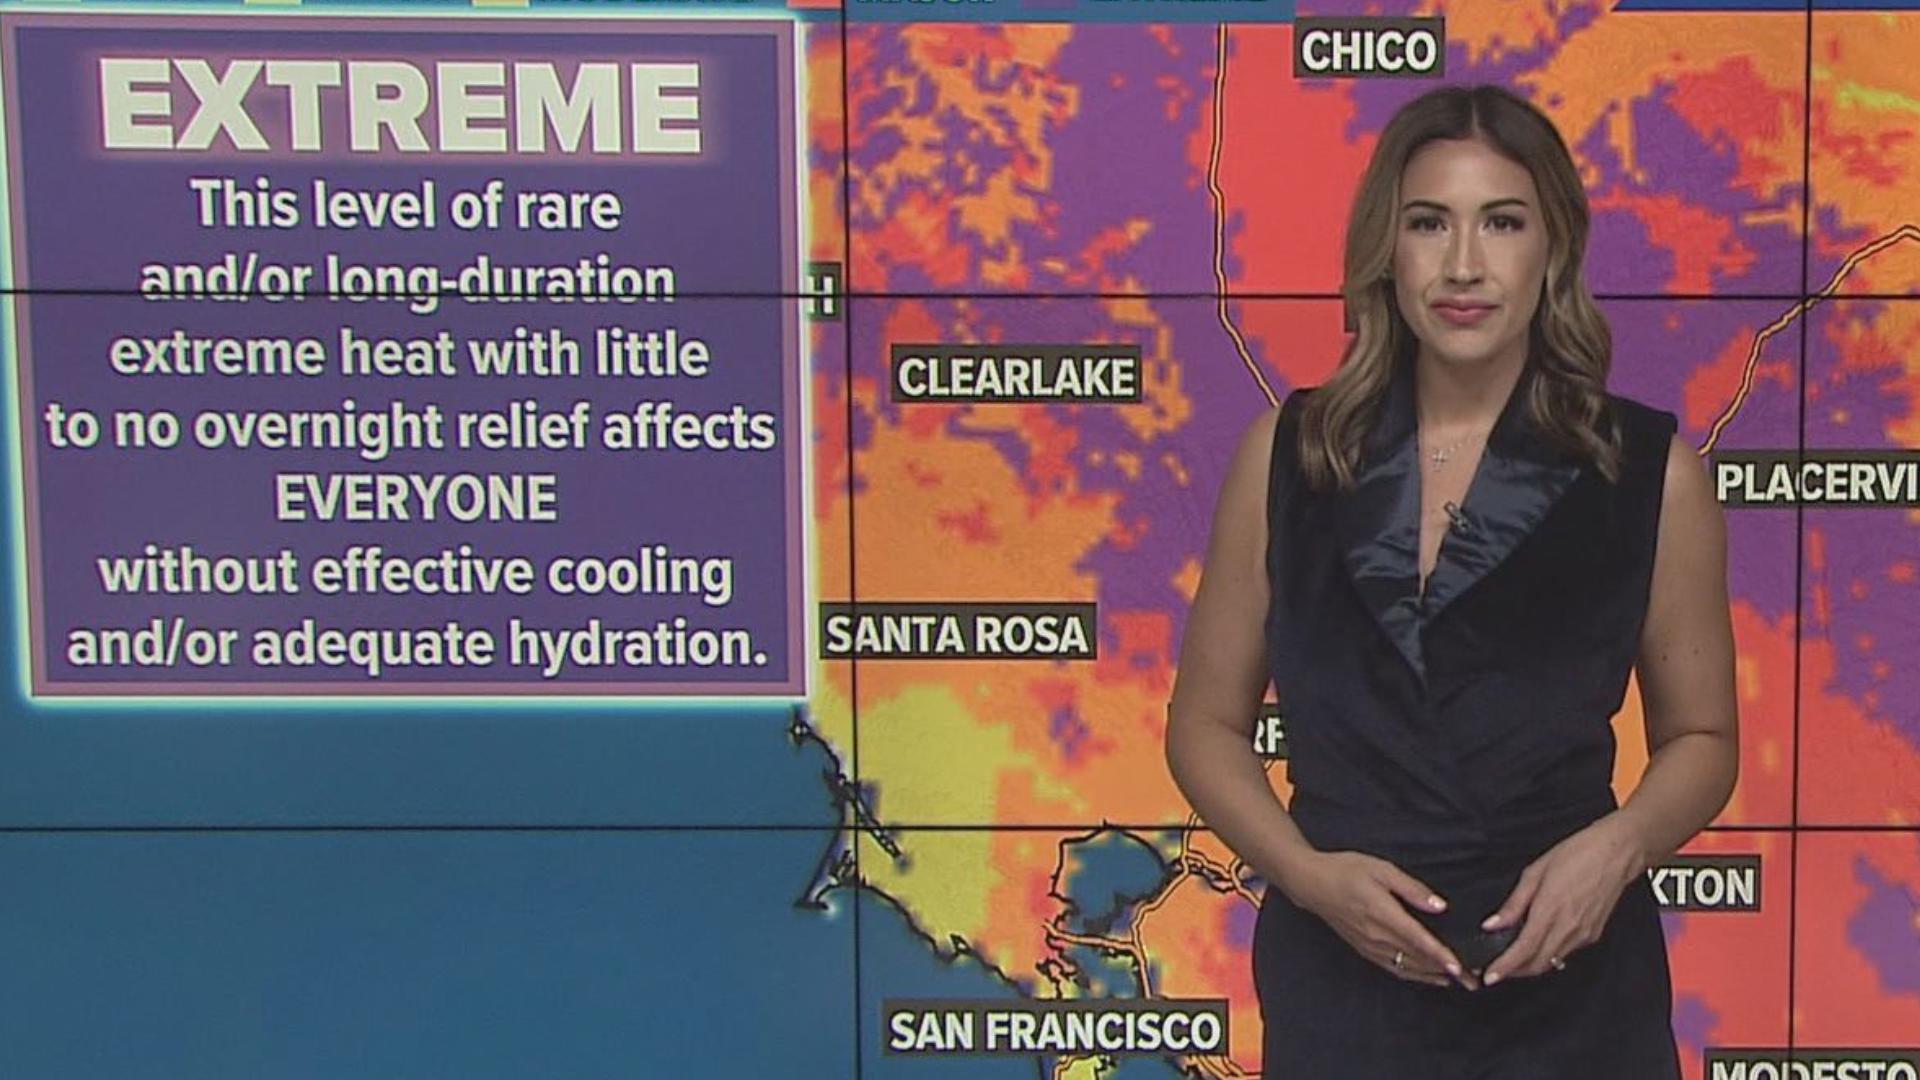 There's not much relief ahead in the forecast as extreme heat grips Northern California.